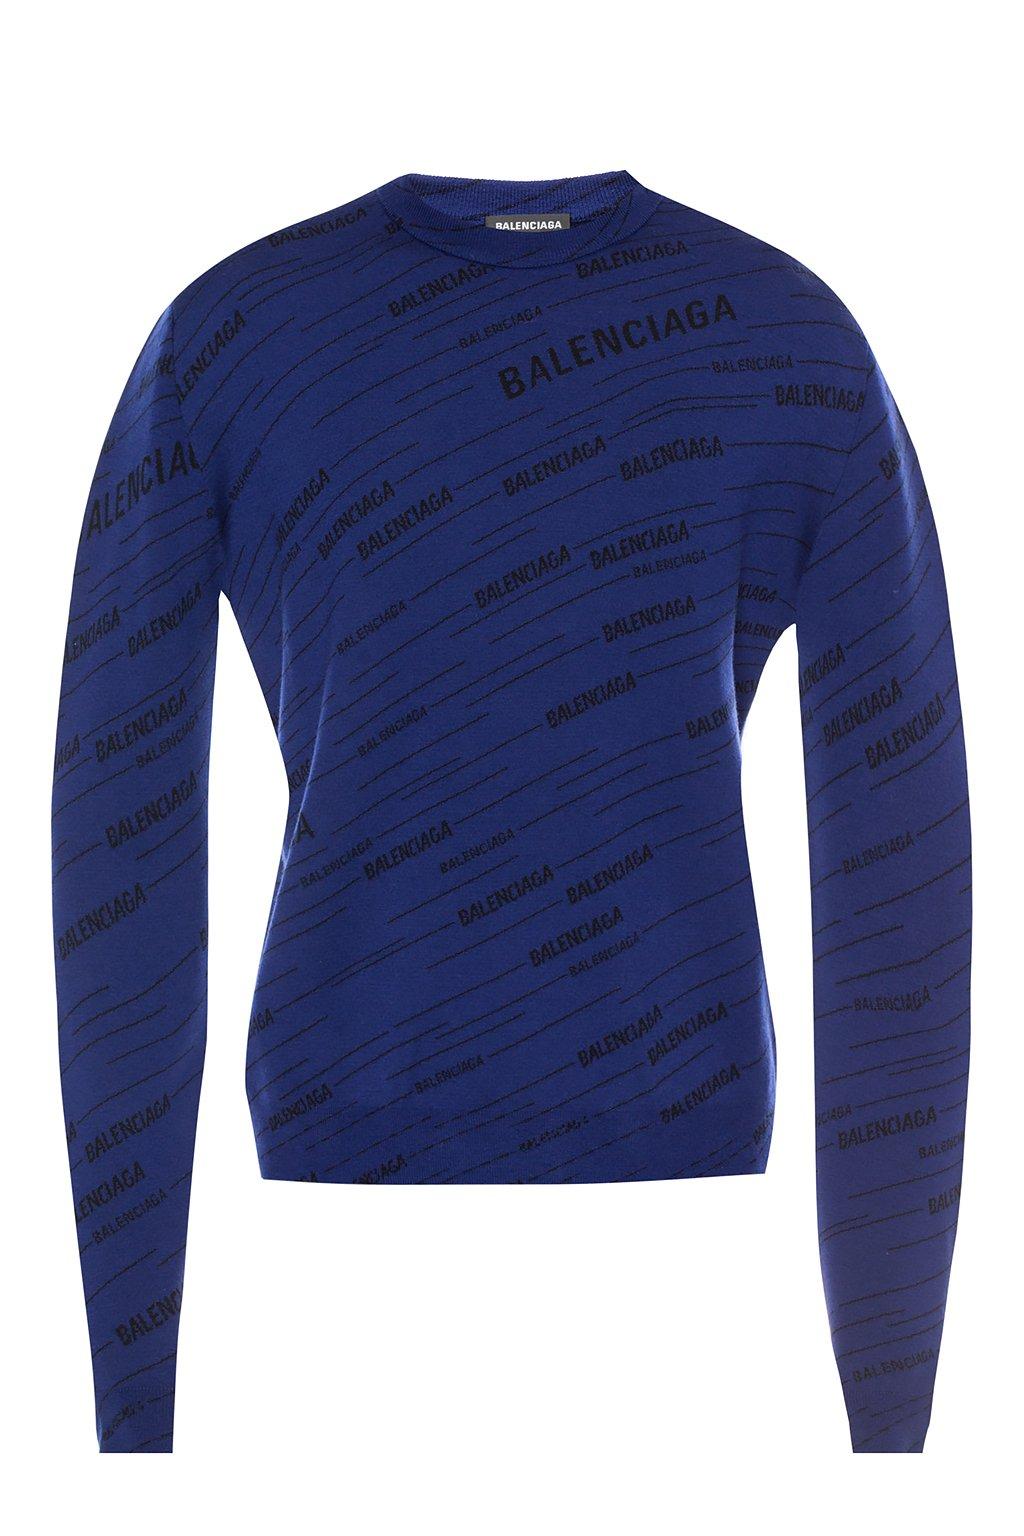 Balenciaga Wool Patterned Sweater in Navy Blue (Blue) for Men - Lyst